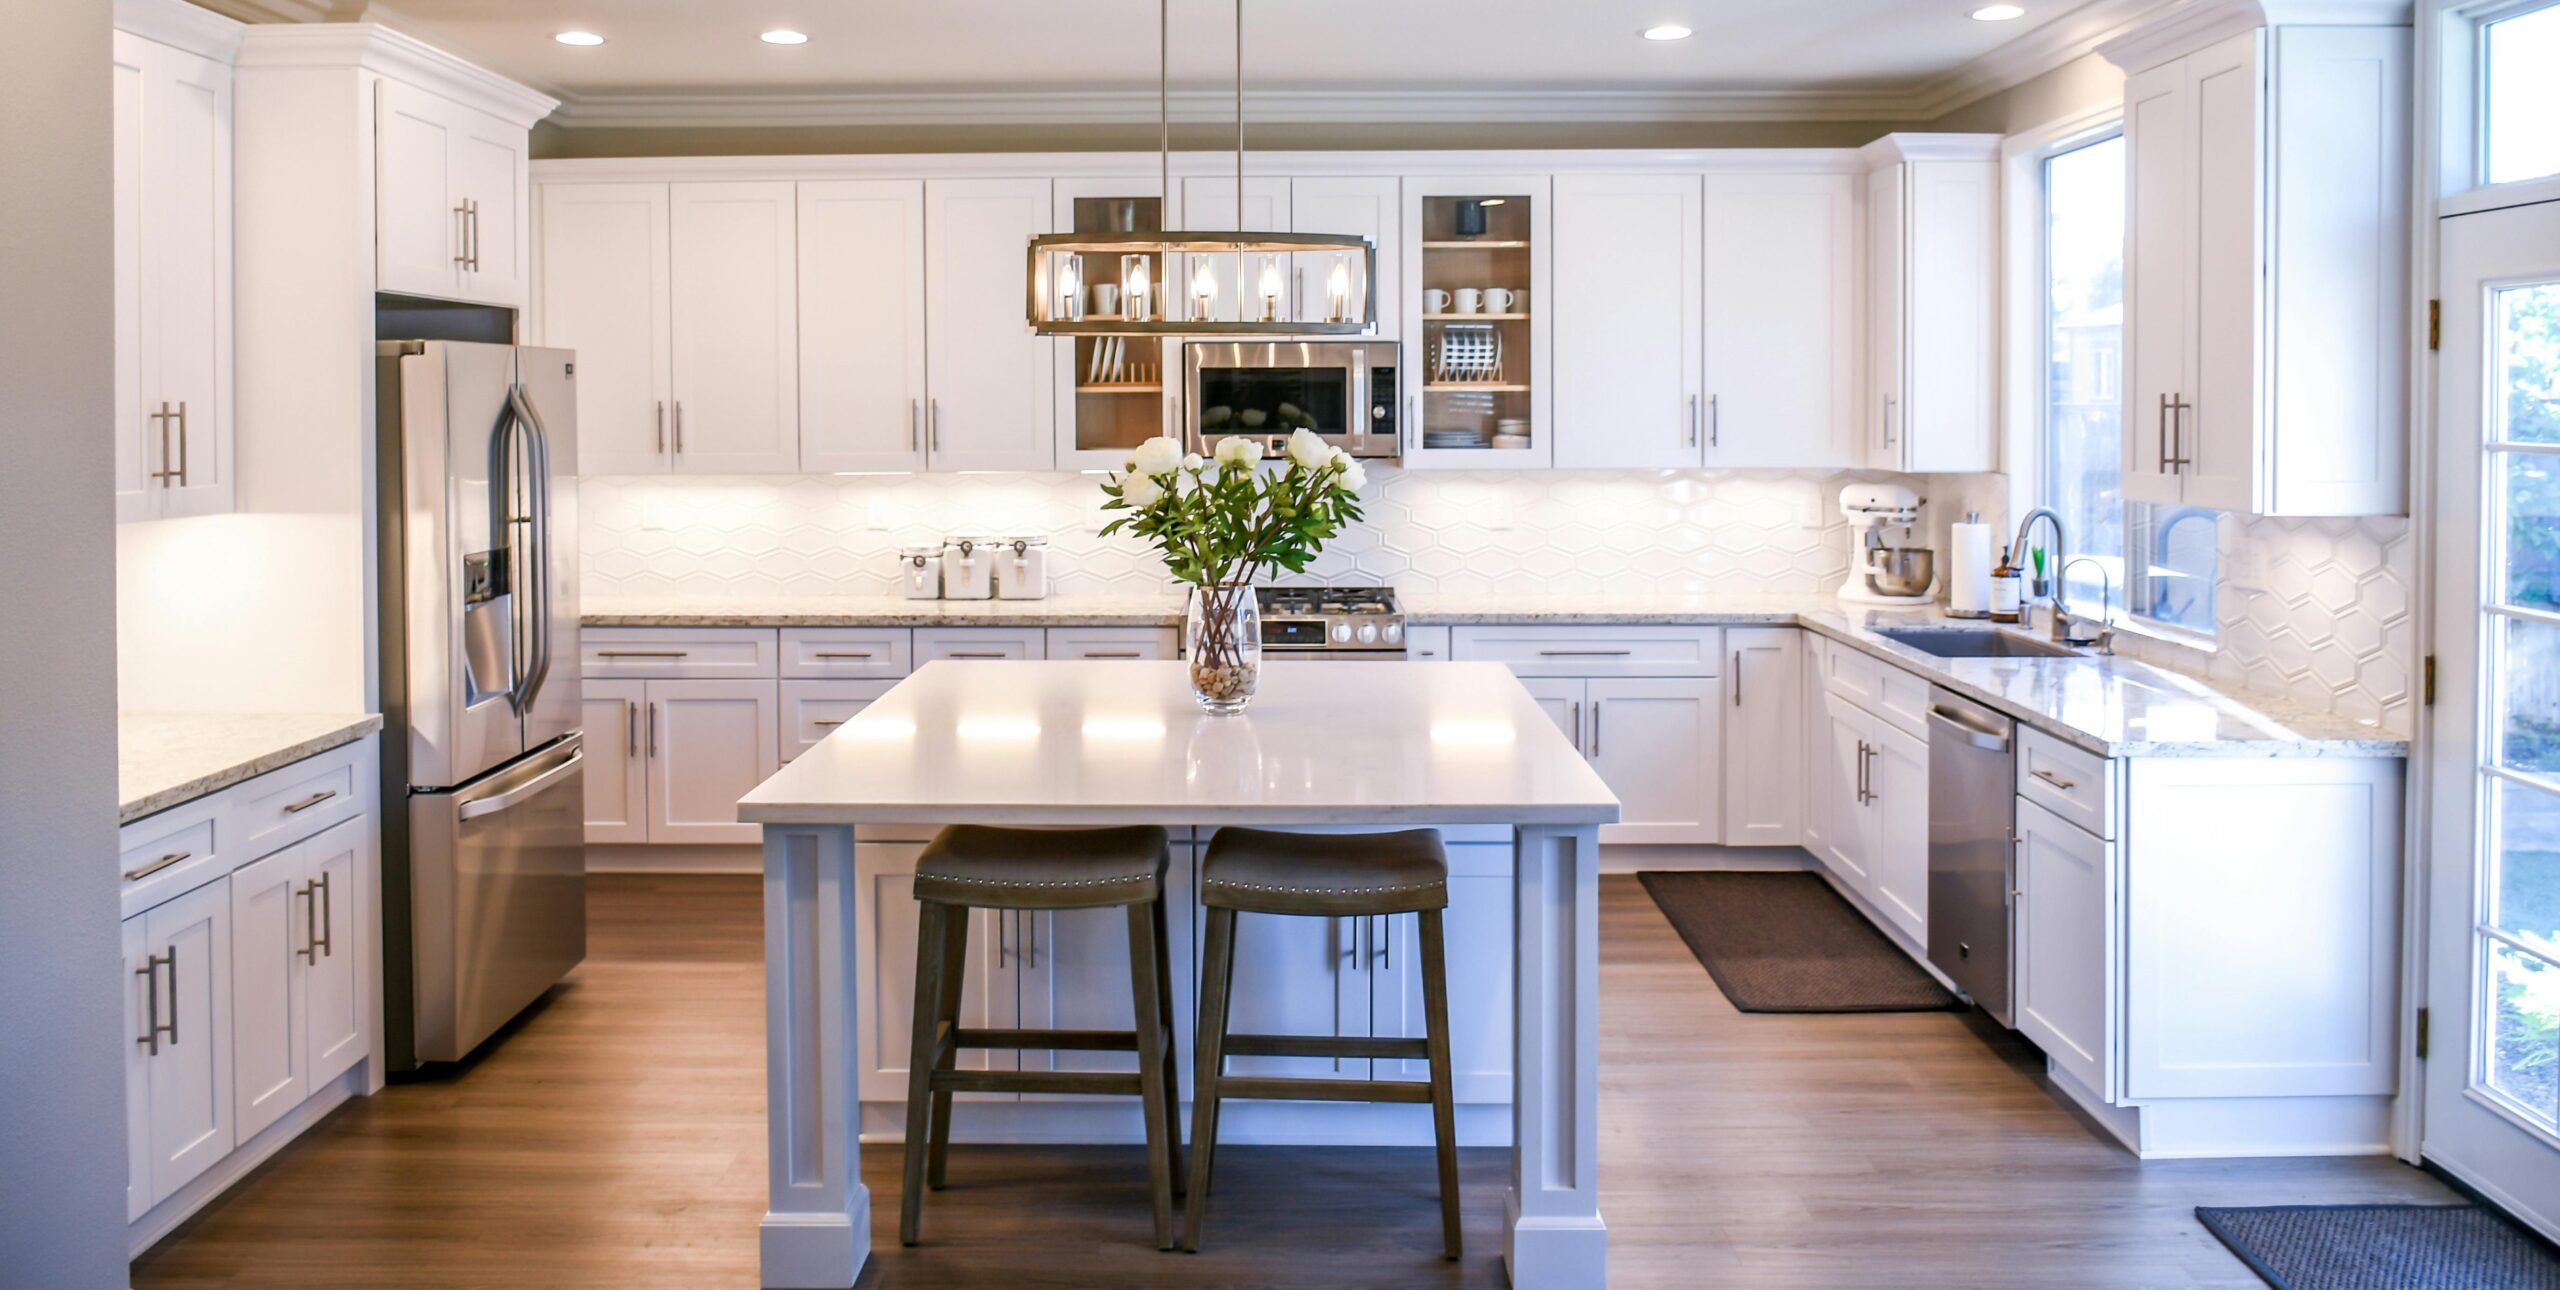 Spring Cleaning is a great time to de-clutter and wipe down the surfaces of your kitchen.